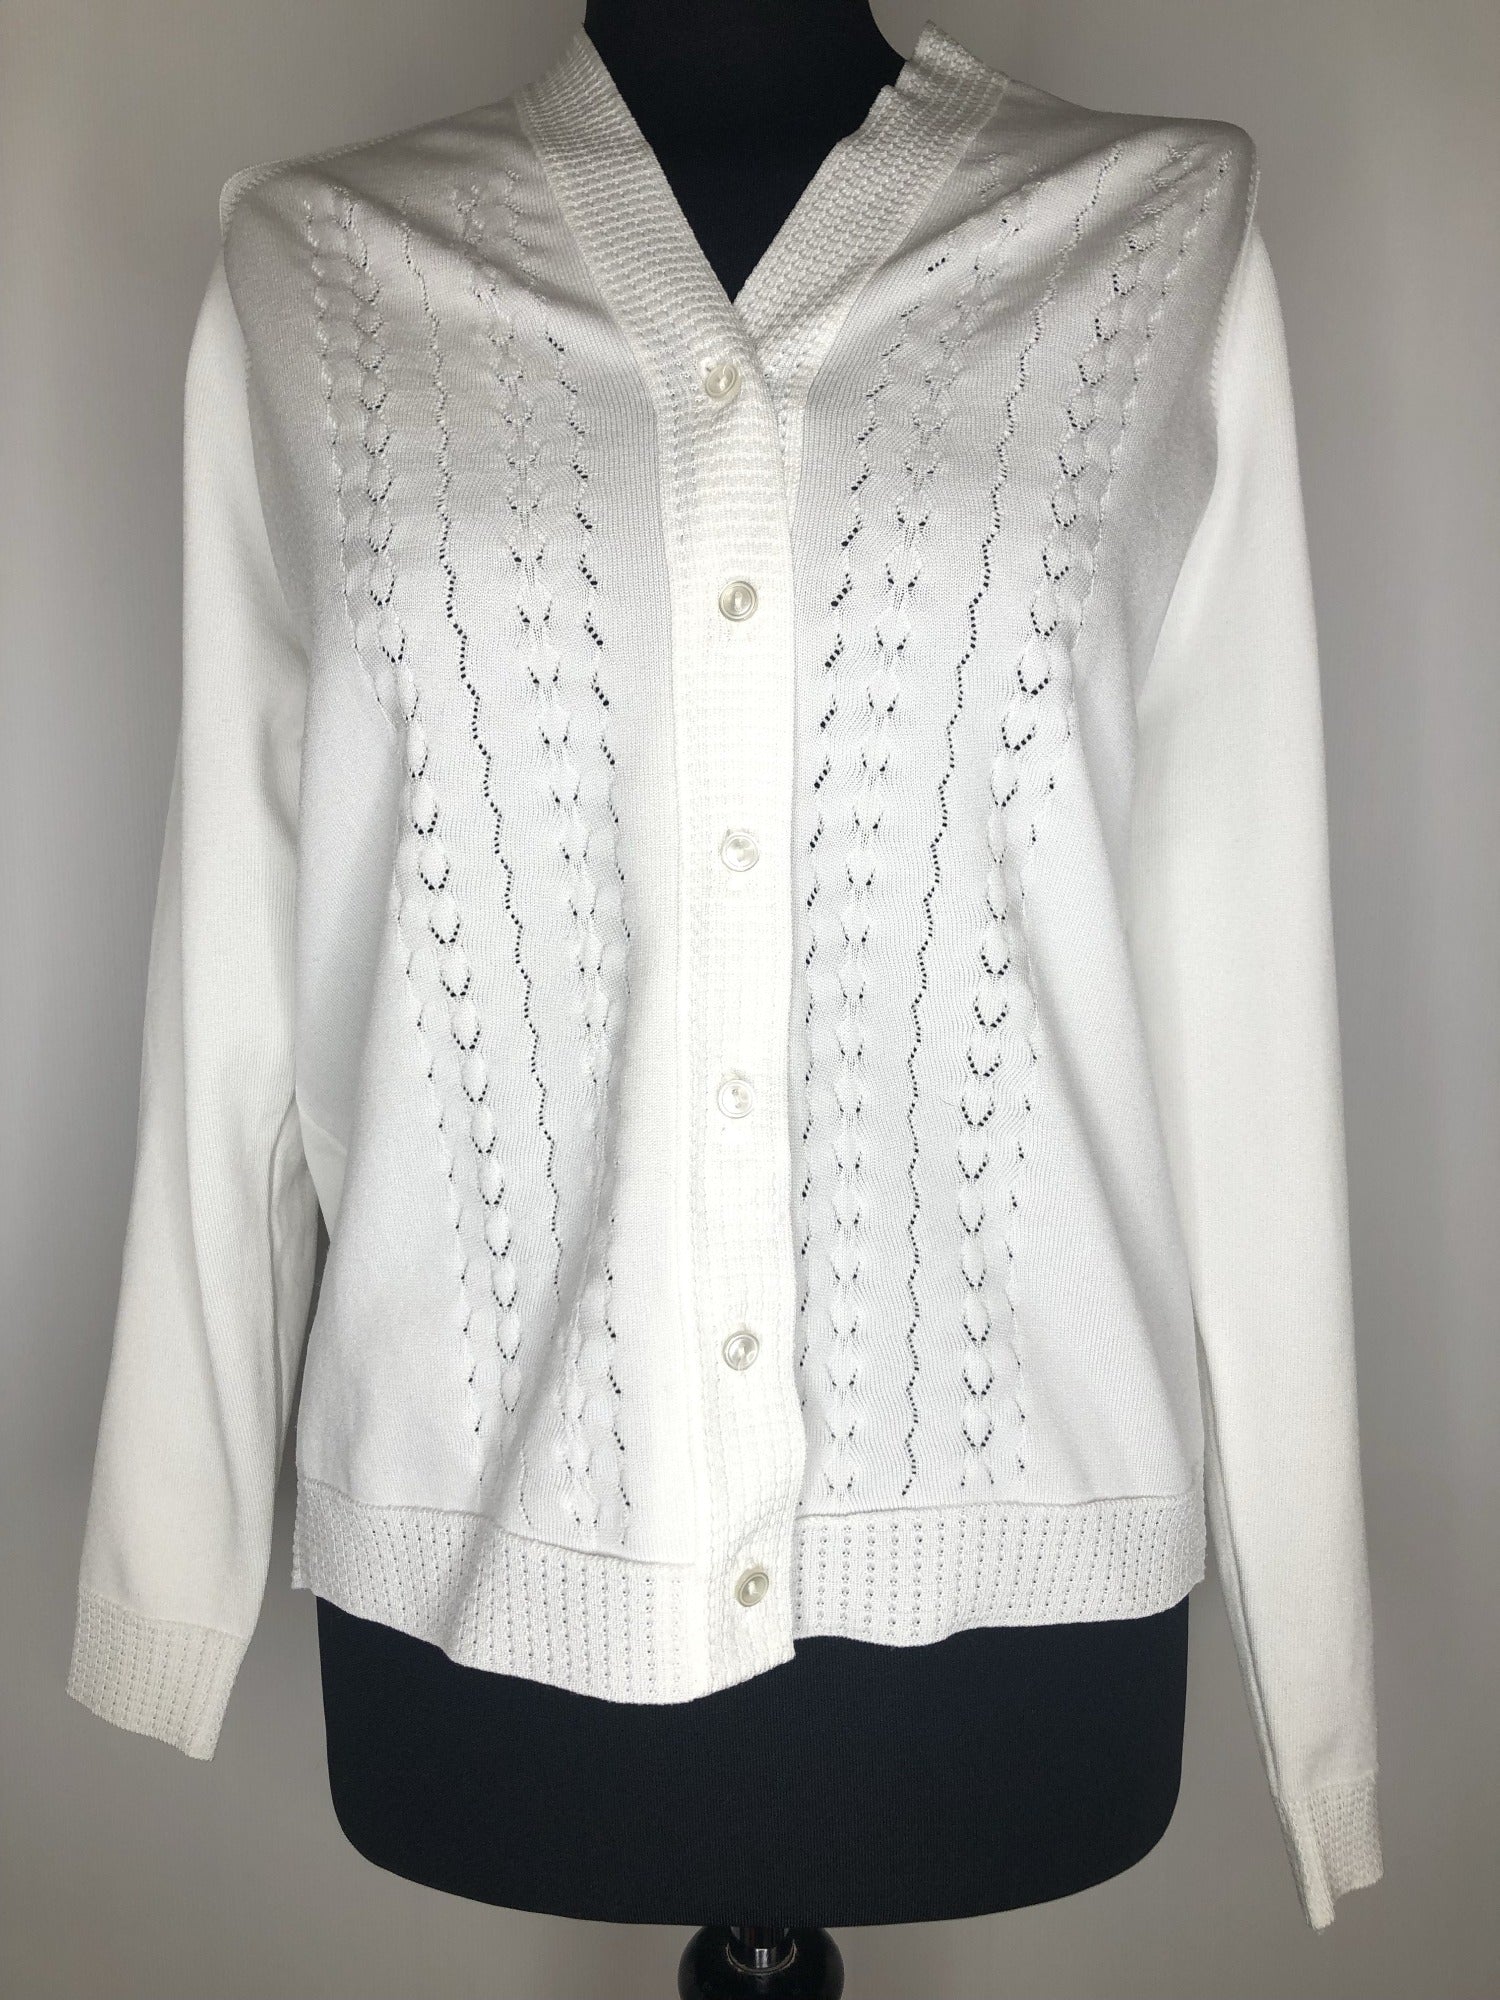 womens  white  vintage  Urban Village Vintage  top  sweater  MOD  Lightweight Knit  light knit  knitwear  knitted  knit  cropped  cardigan  cardi  Buckland  60s  1960s  16